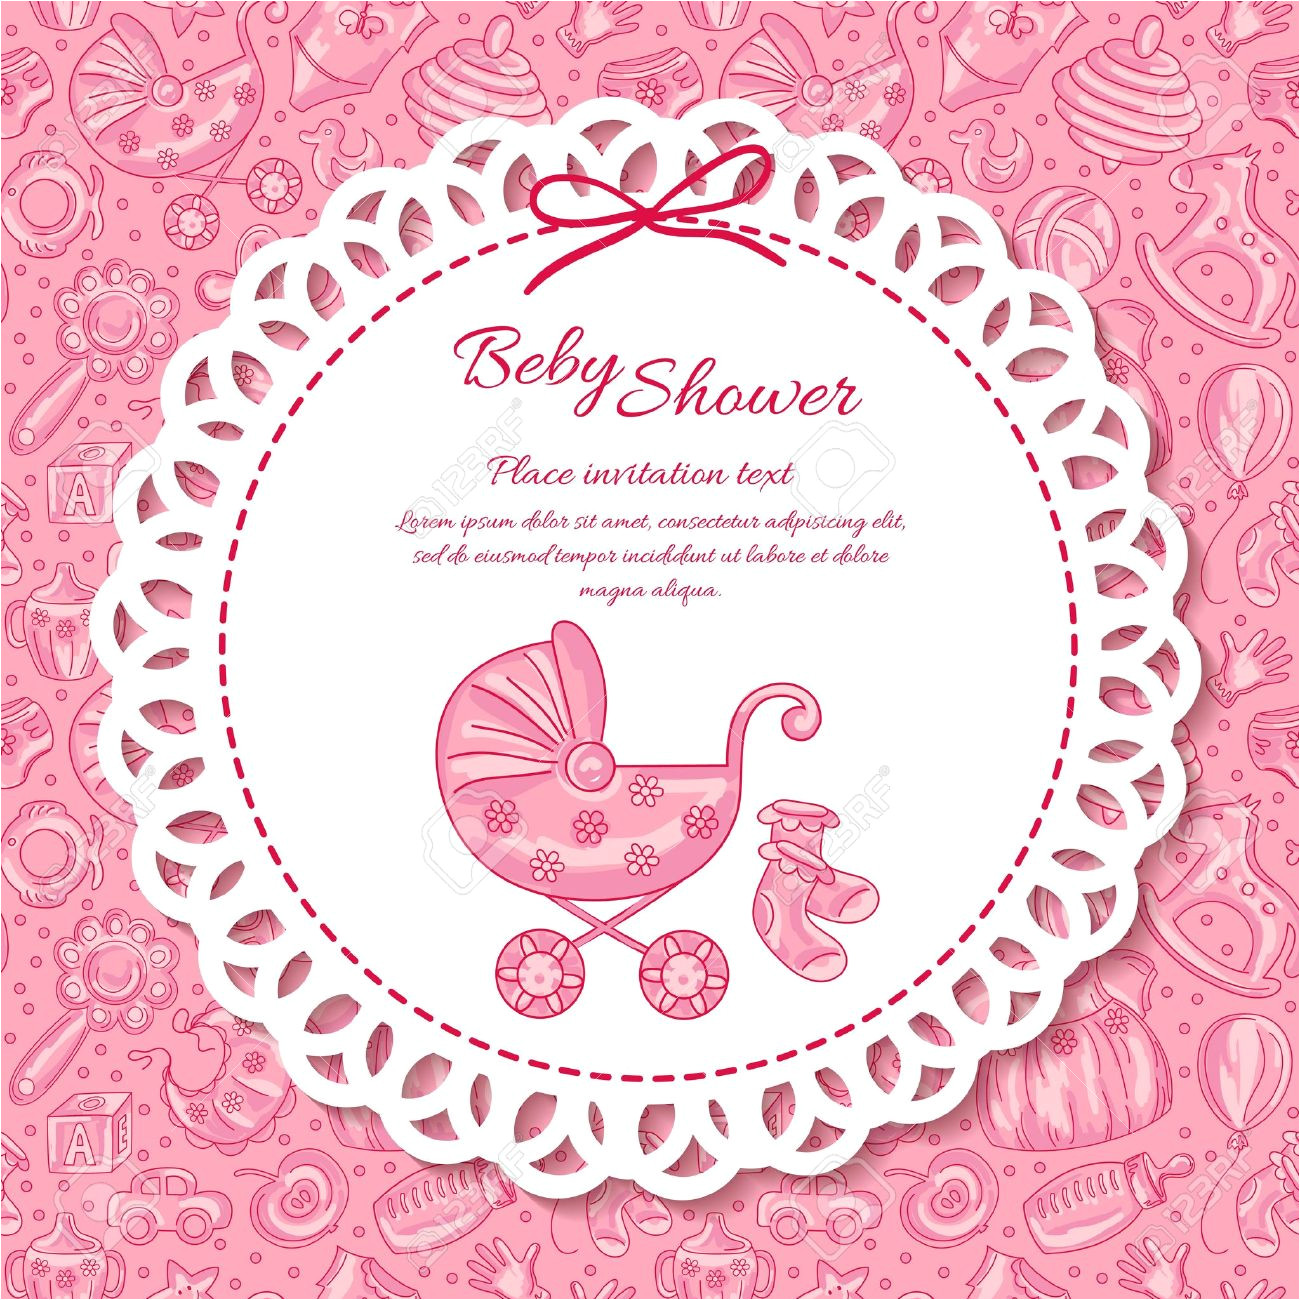 33472827 baby shower greeting card for baby girl seamless pattern baby icons jpg